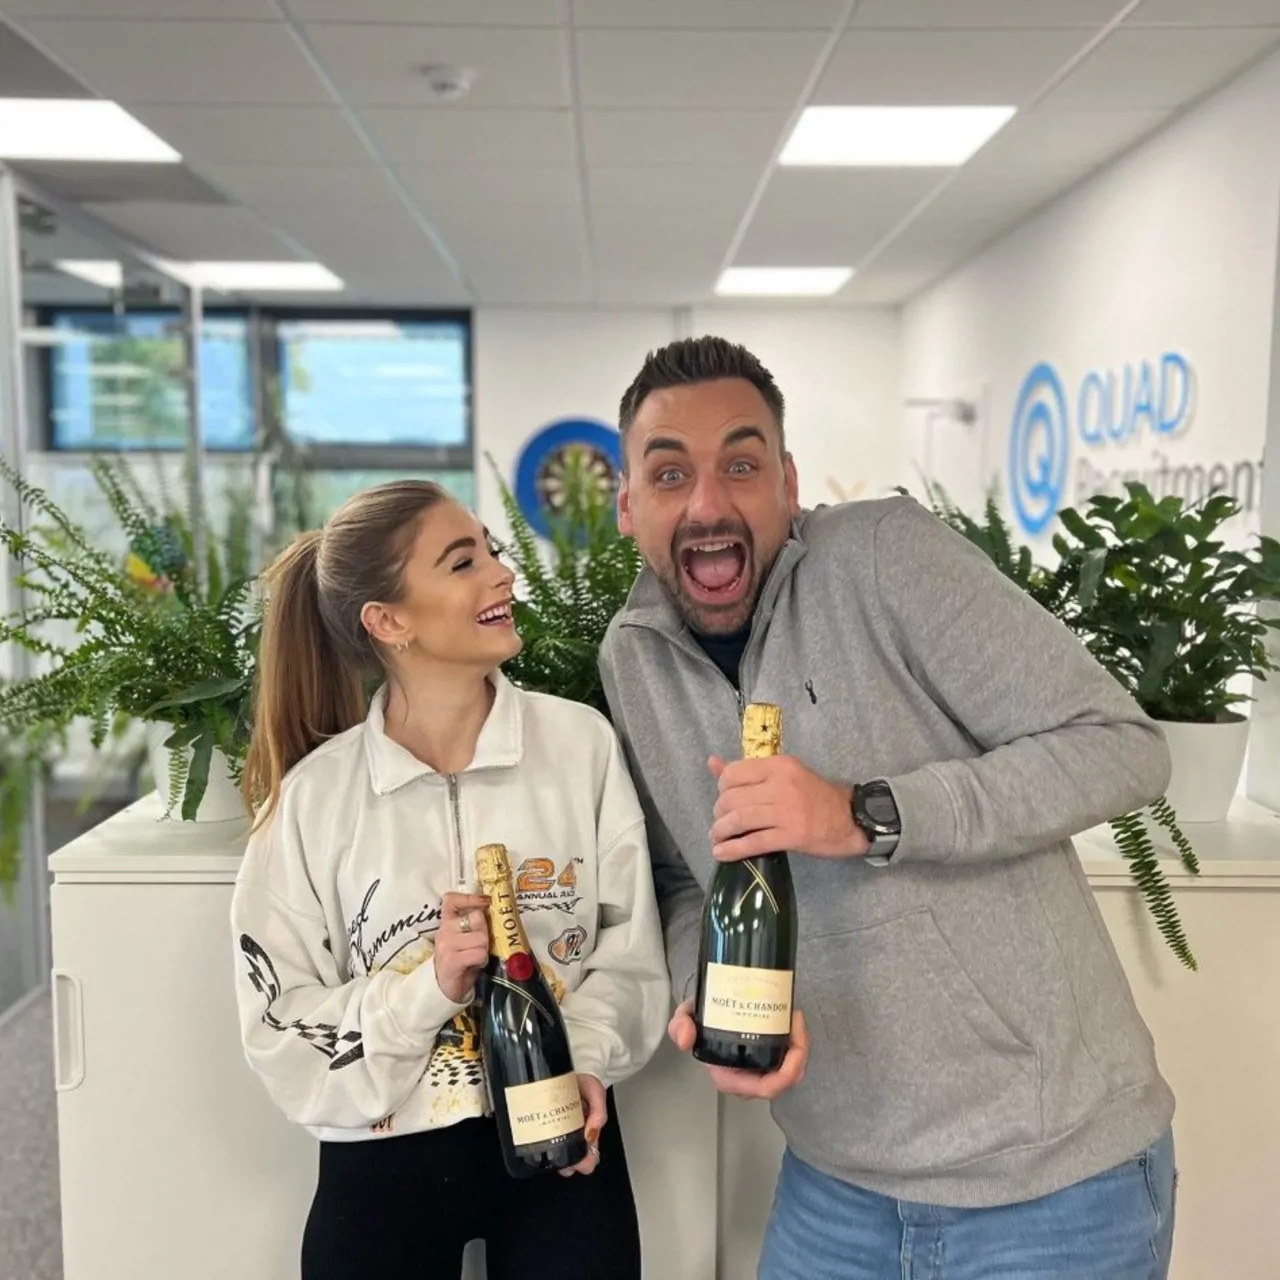 Quad employees gifted champagne